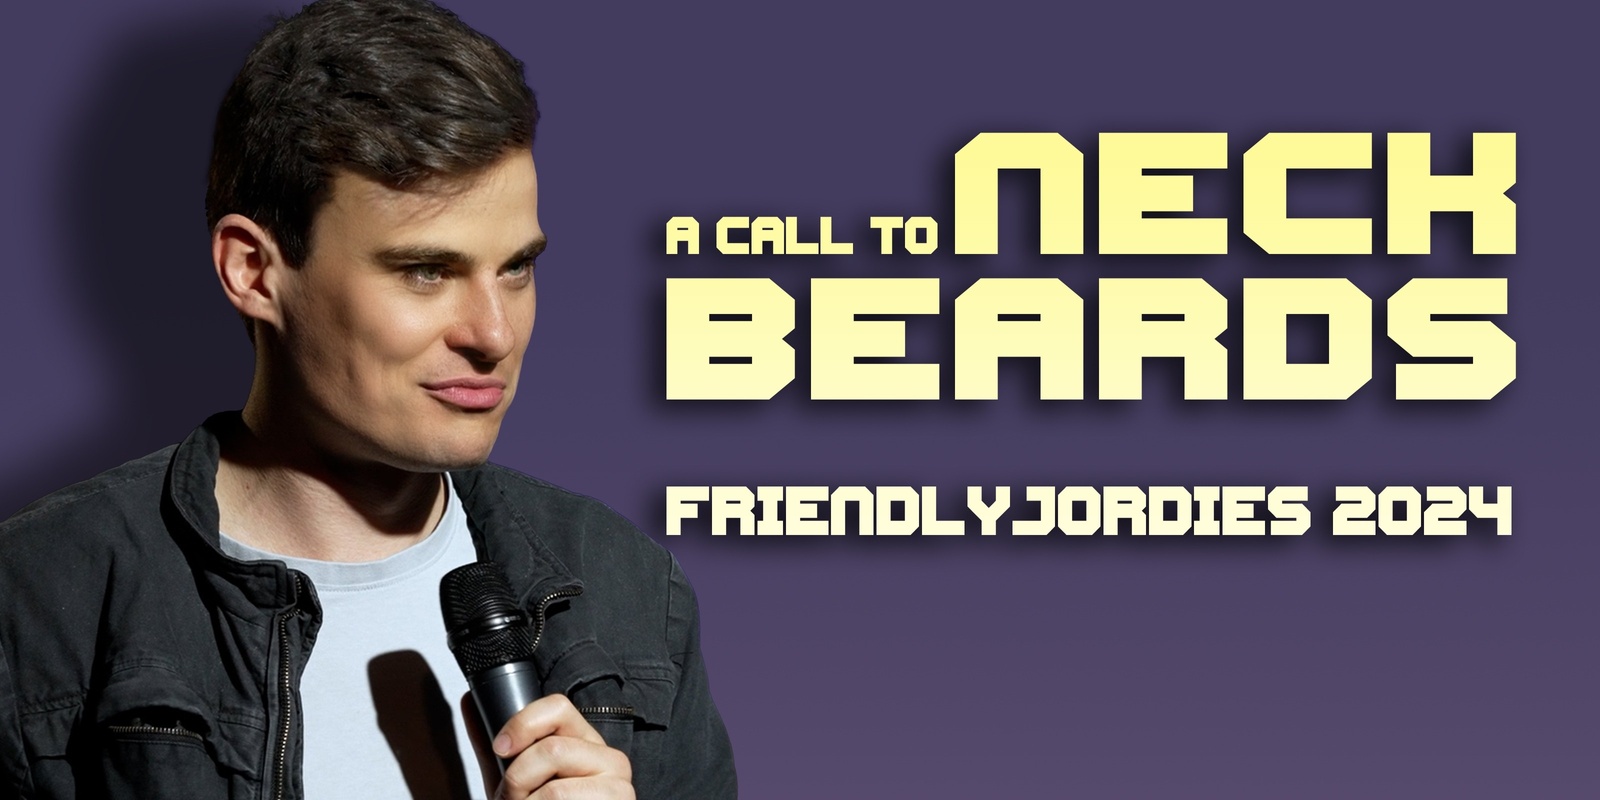 Banner image for Bathurst: Friendlyjordies Presents - A Call to Neck Beards